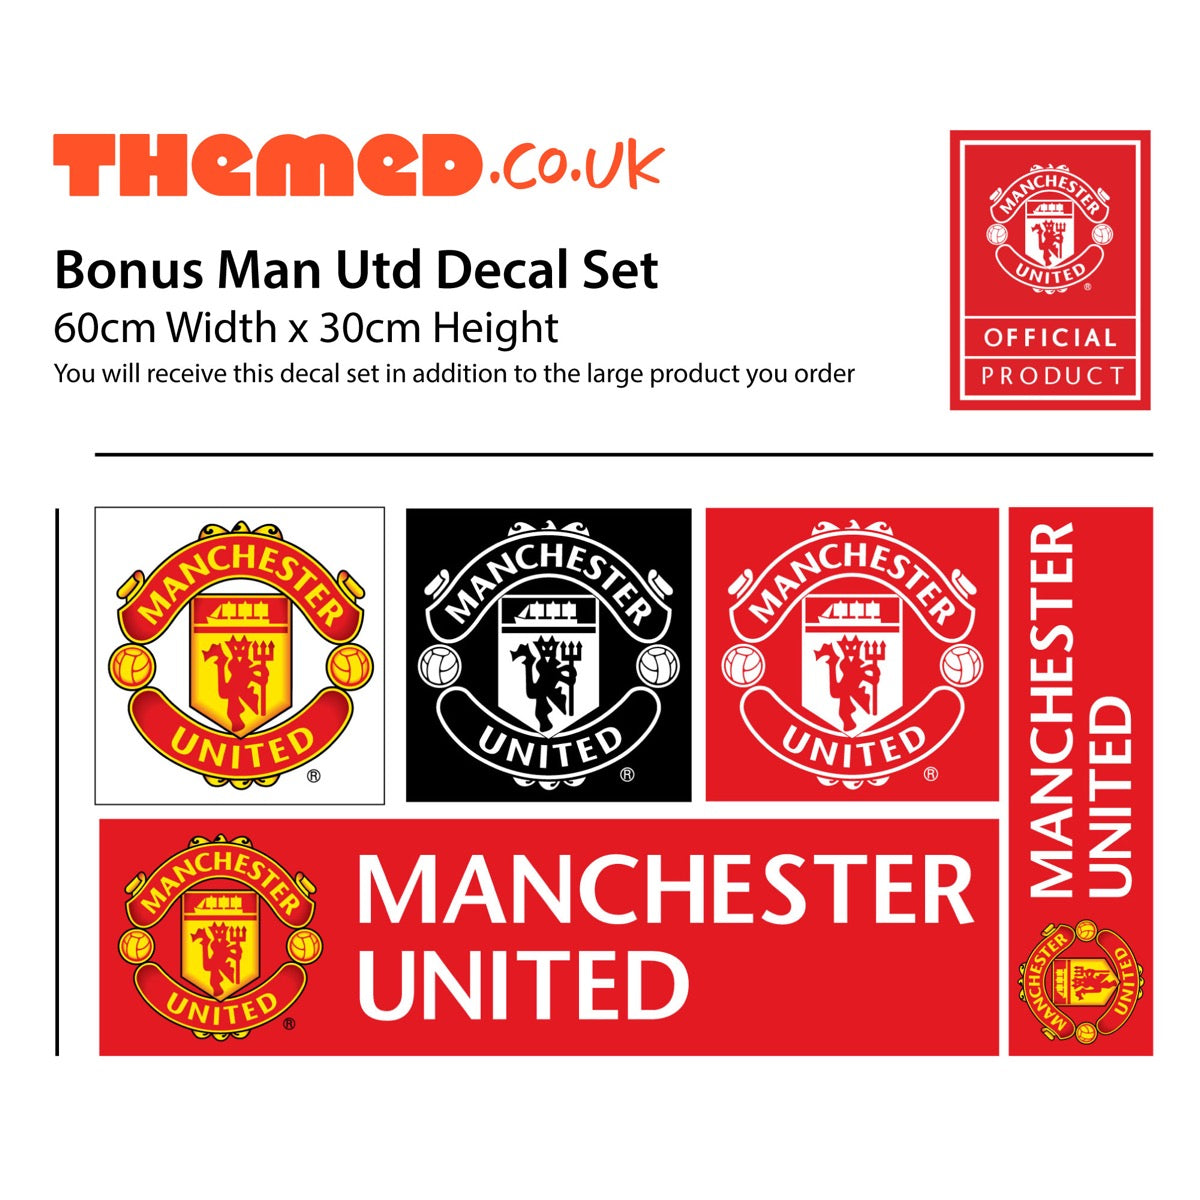 Manchester United FC Wall Sticker - Mary Earps 22/23 Player Wall Decal